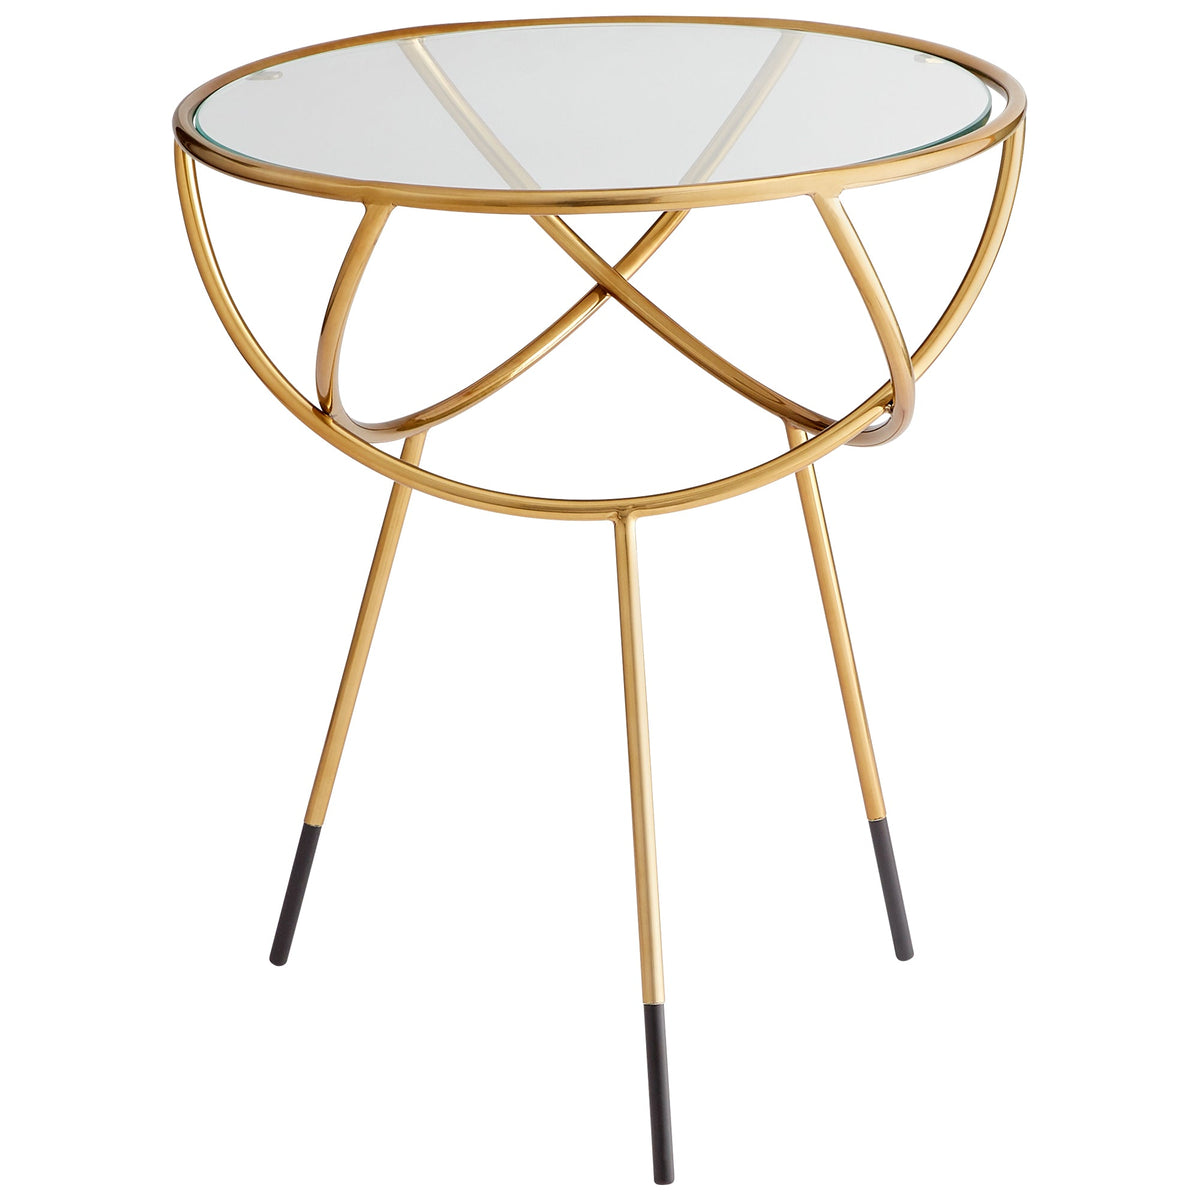 Gyroscope Side Table|Gold by Cyan